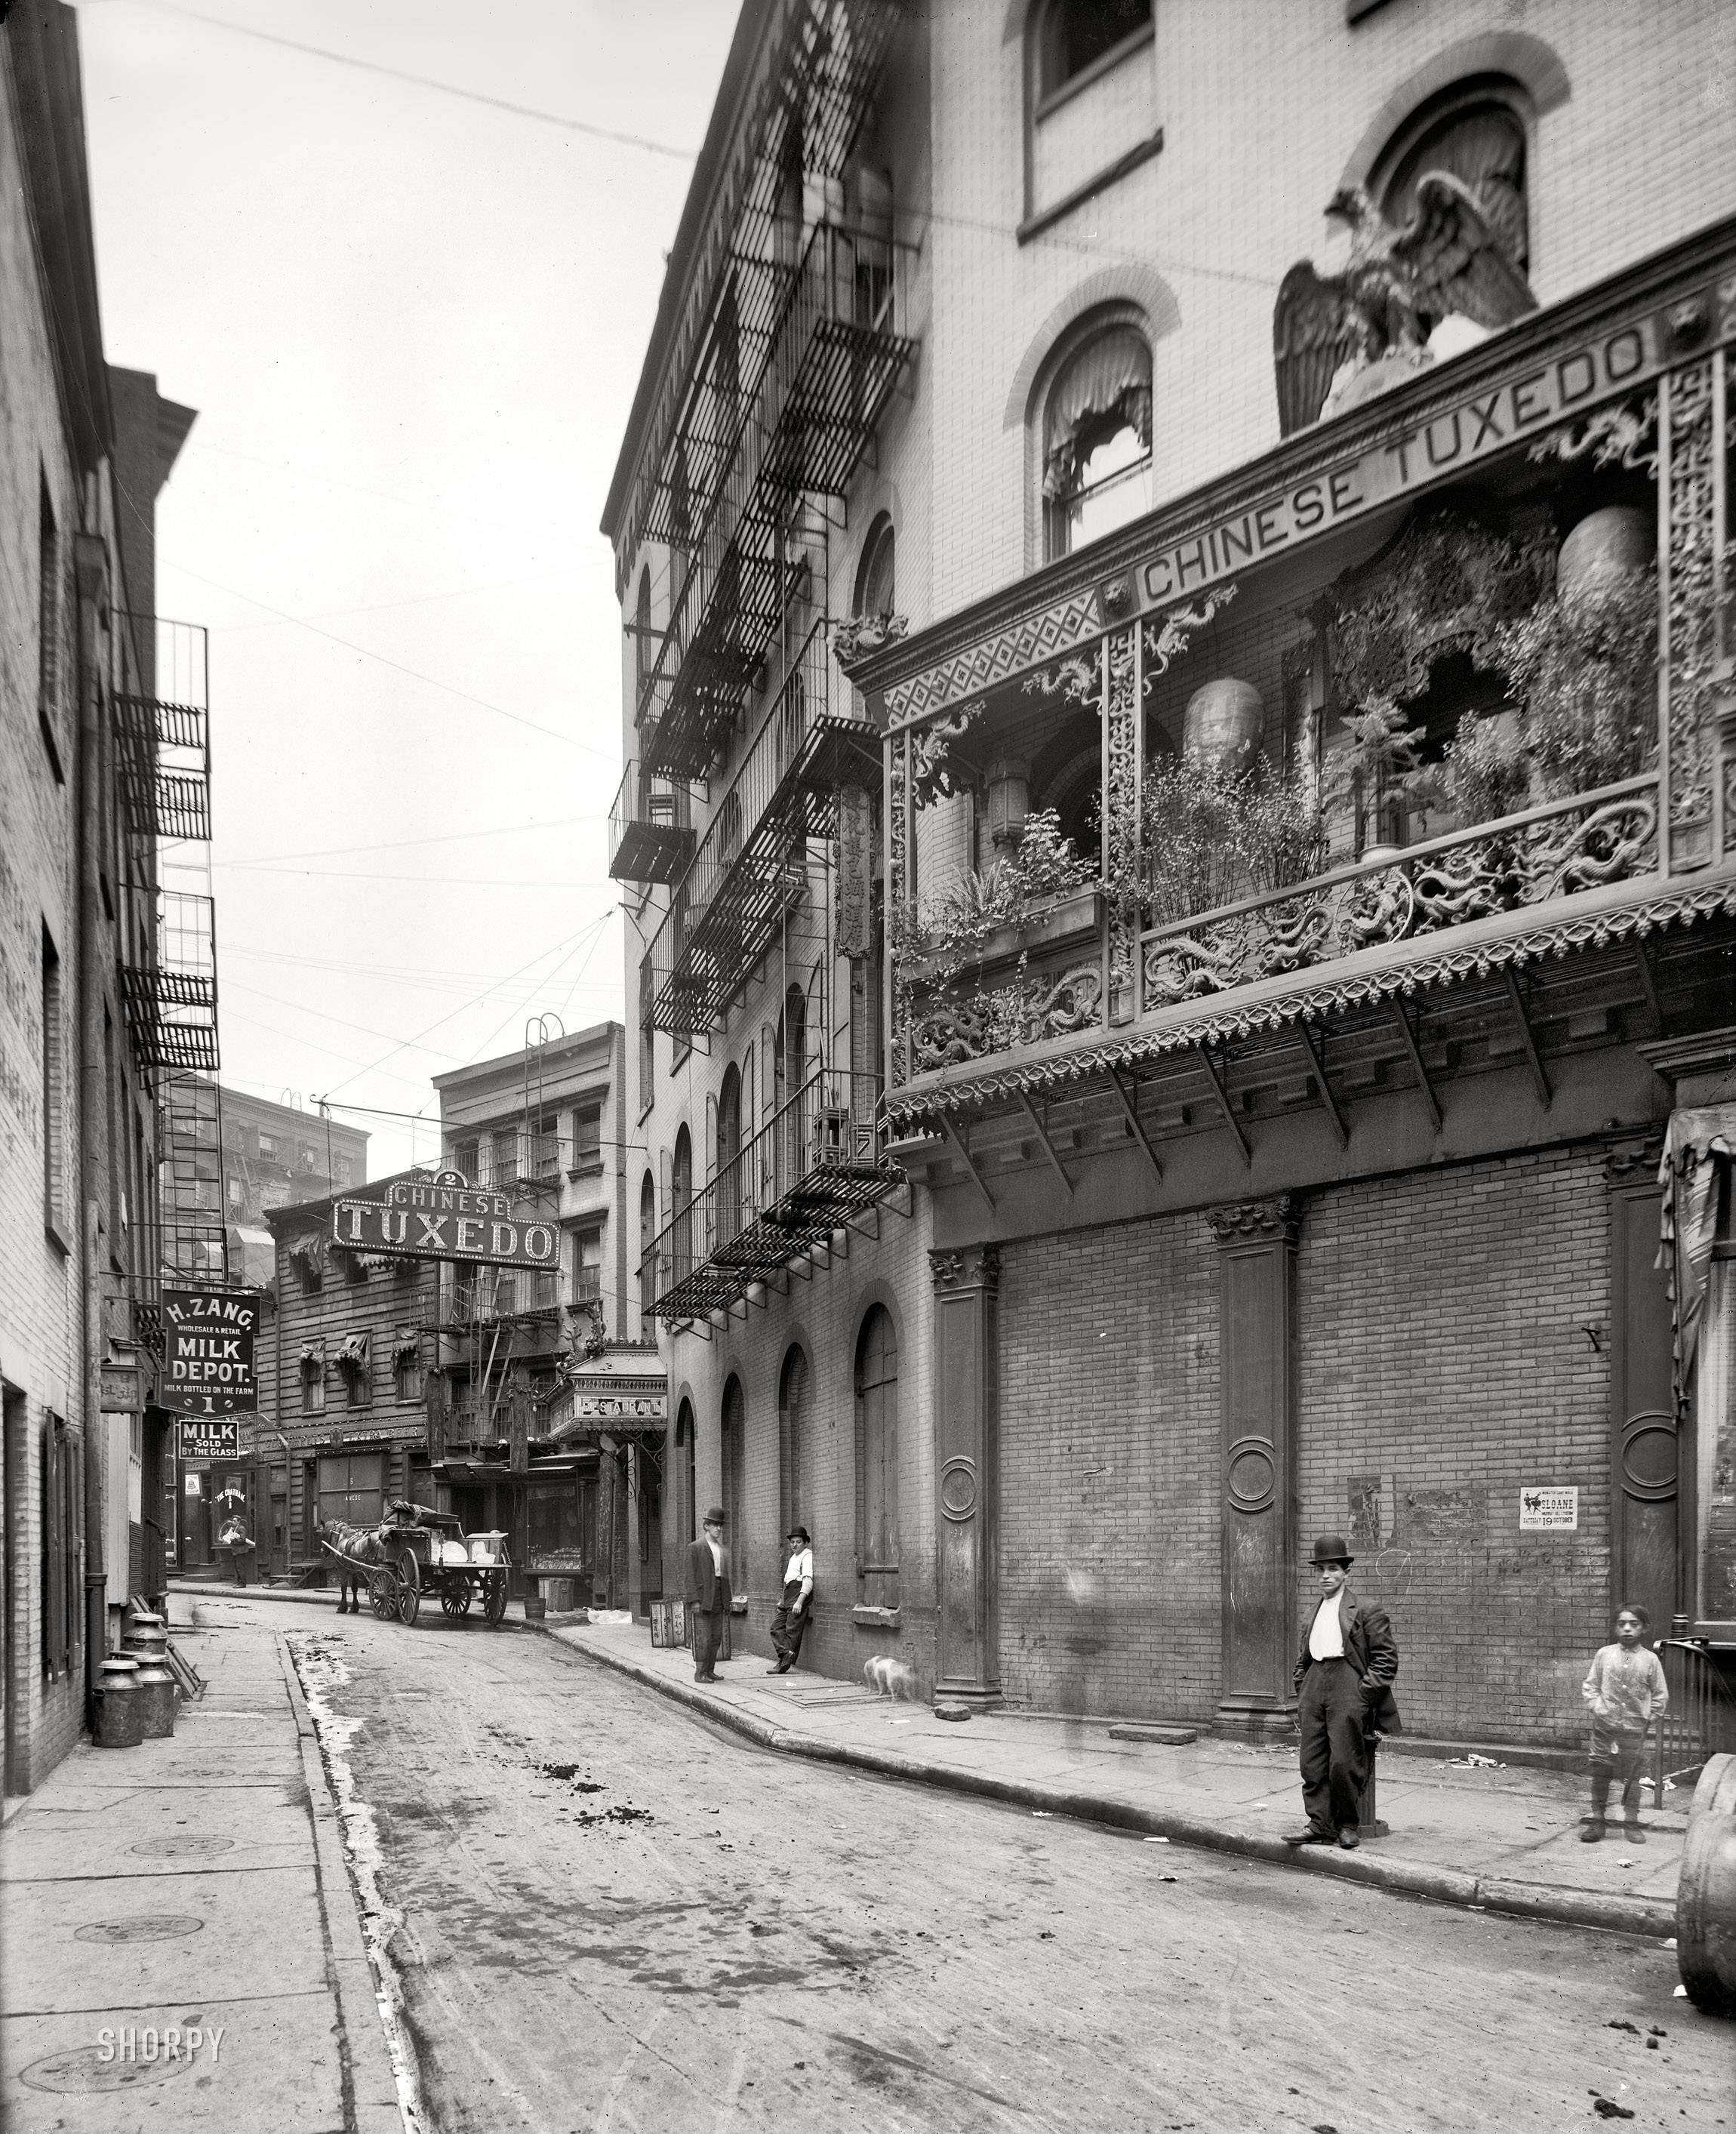 Circa 1901, continuing our tour of New York. "Doyers Street, Chinatown." A wholesome neighborhood where milk can be purchased "by the glass." 8x10 inch dry plate glass negative, Detroit Publishing Company. View full size.